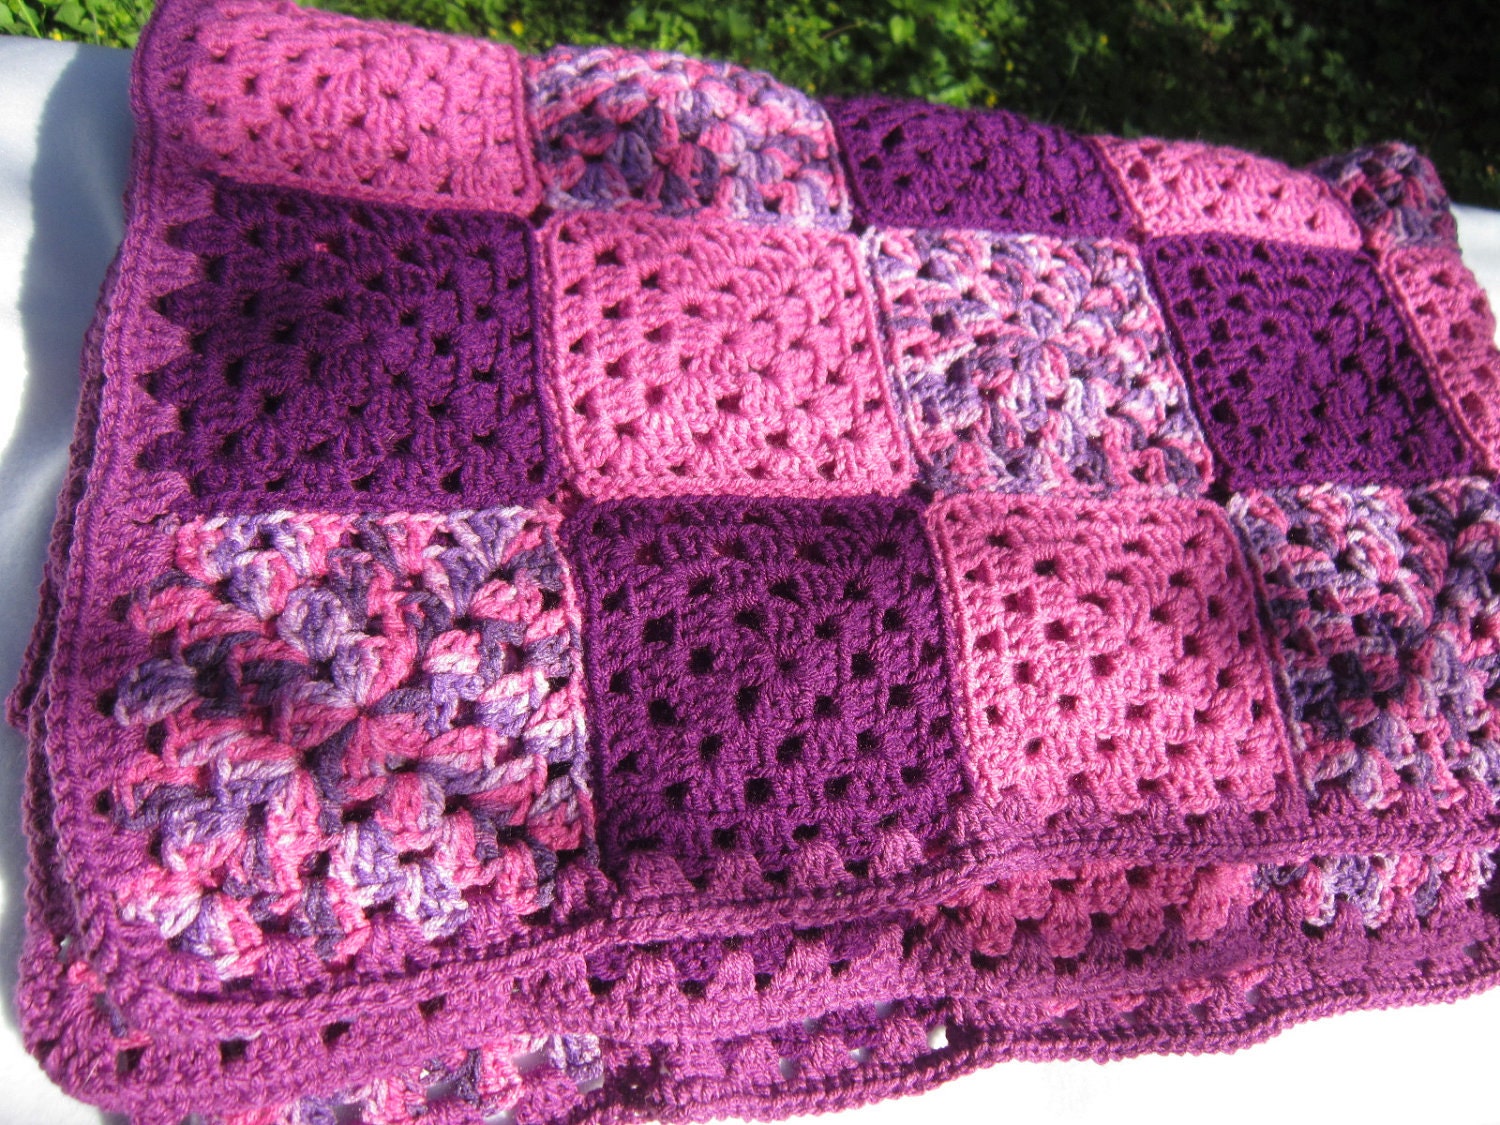 knit and crochet perfect condition bicolor granny squares BLUSH Lovely french vintage afghan blanket pink and white